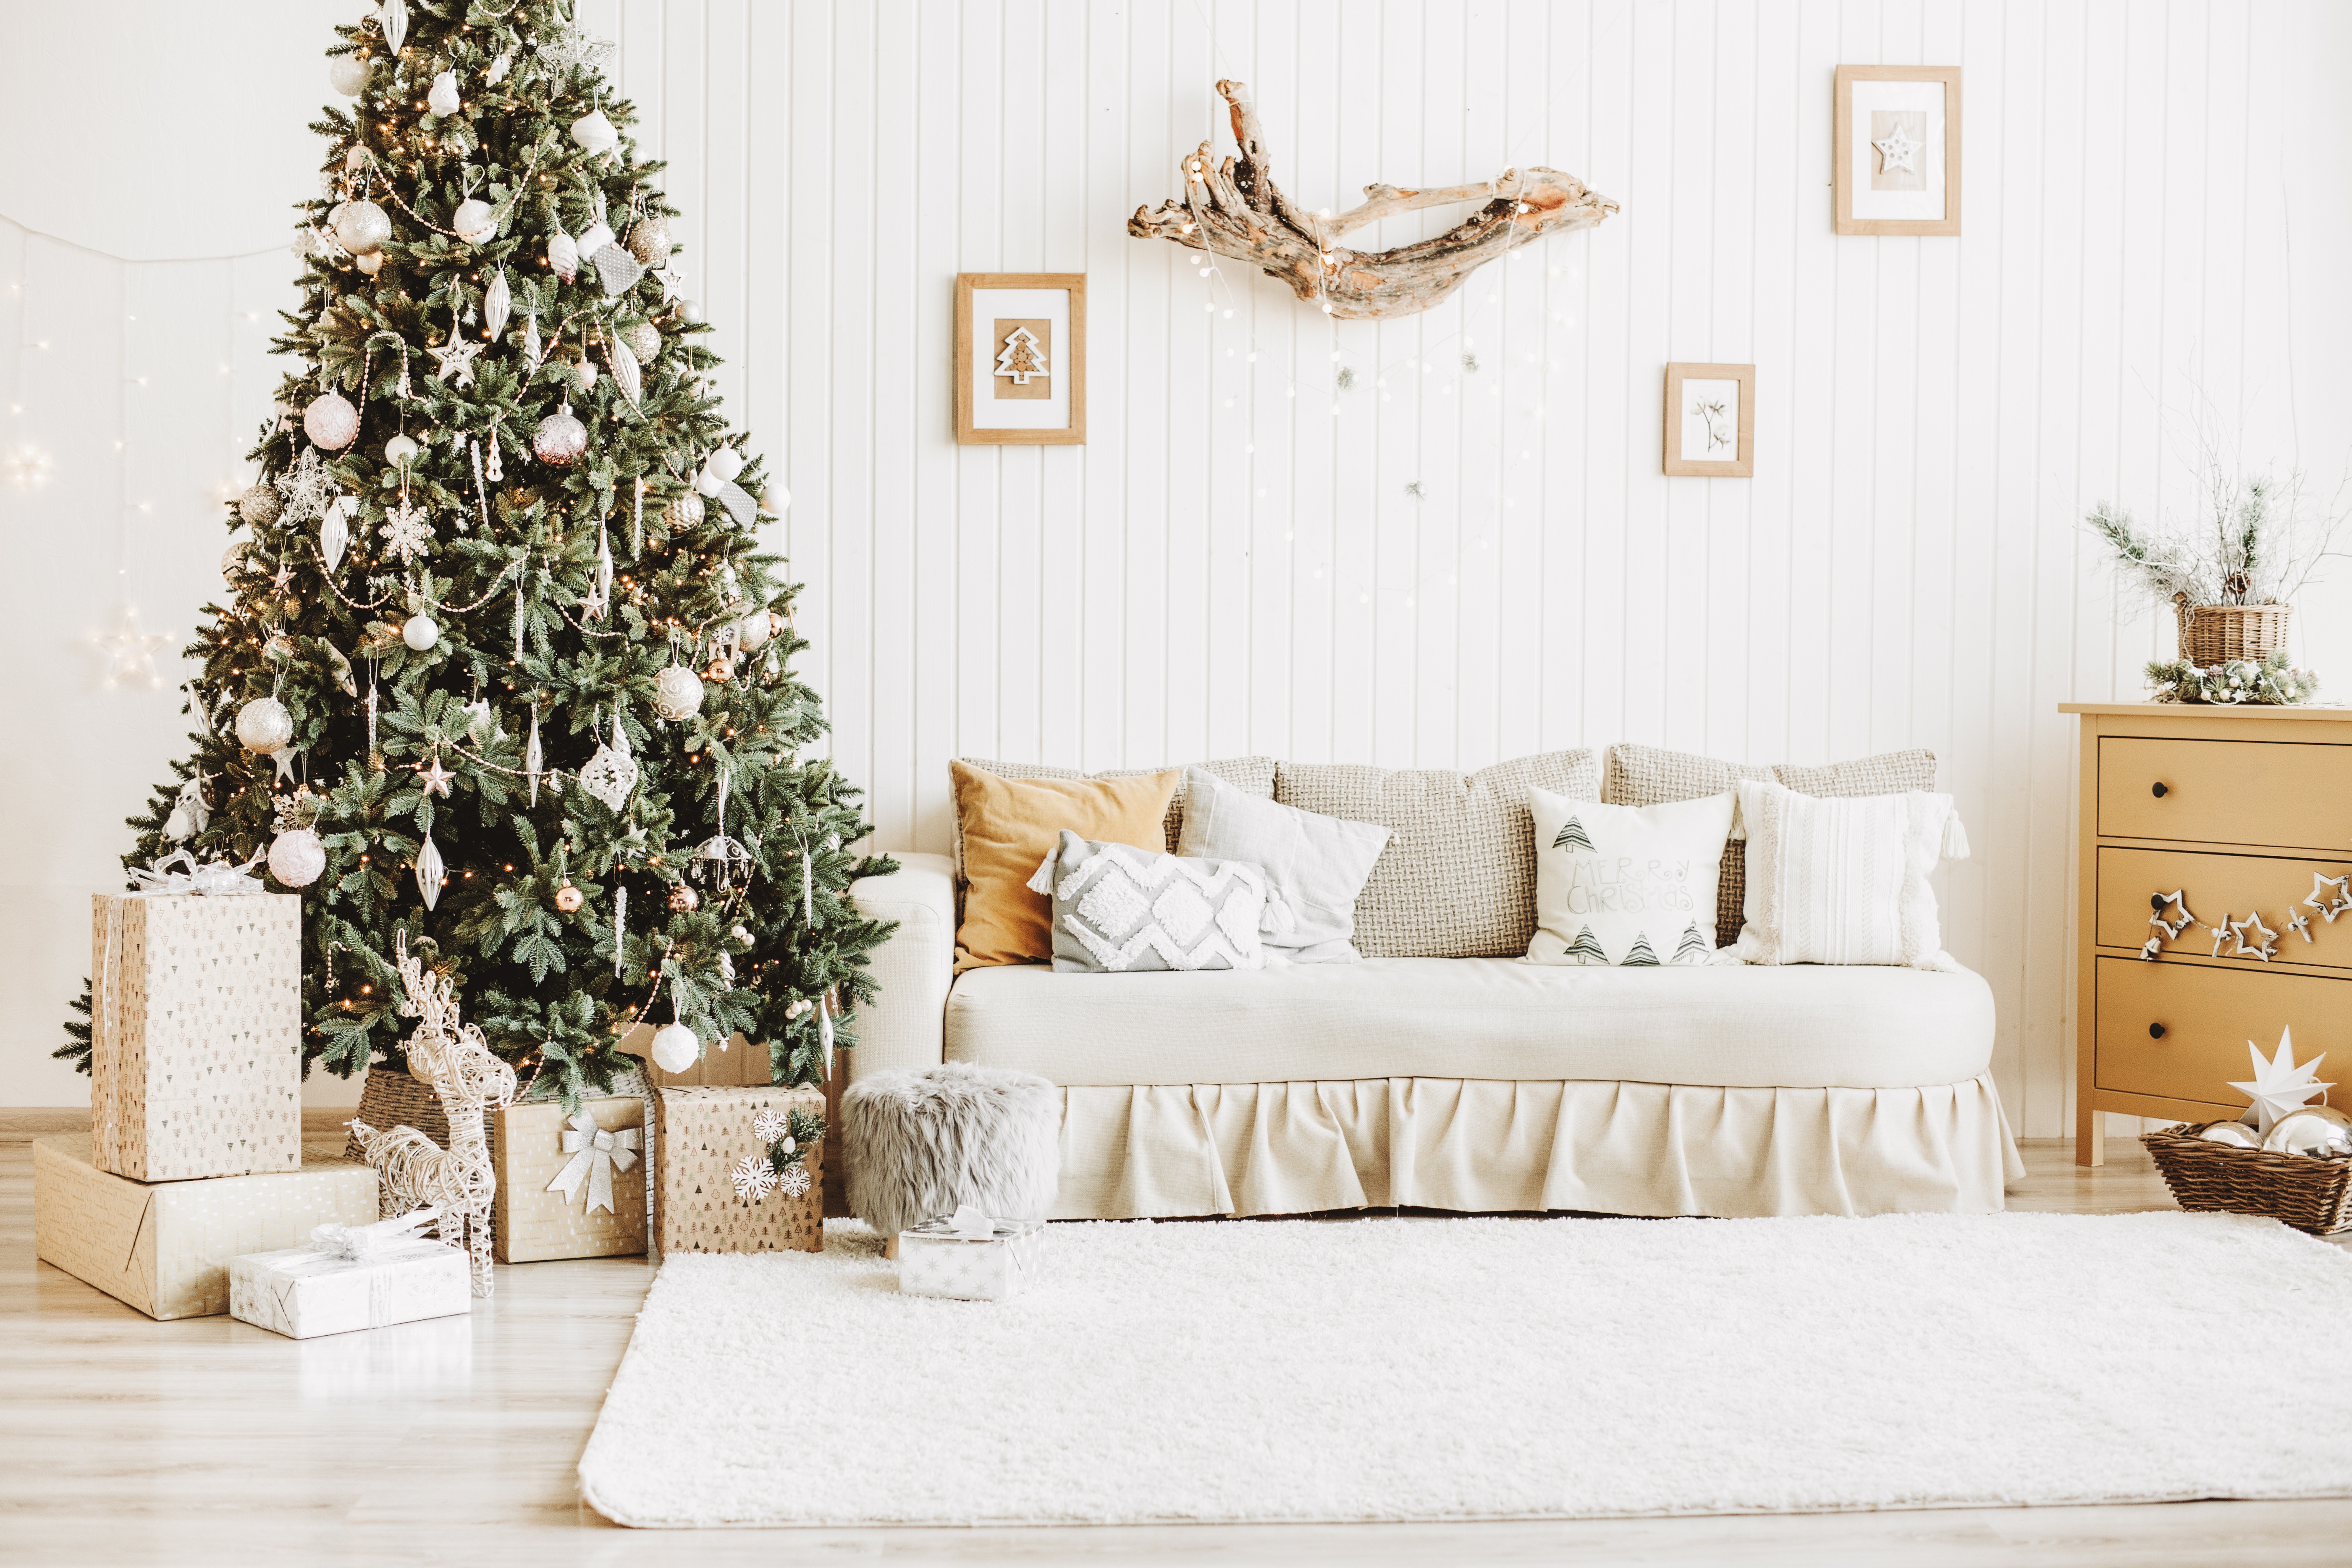 White Themed Room at Christmastime